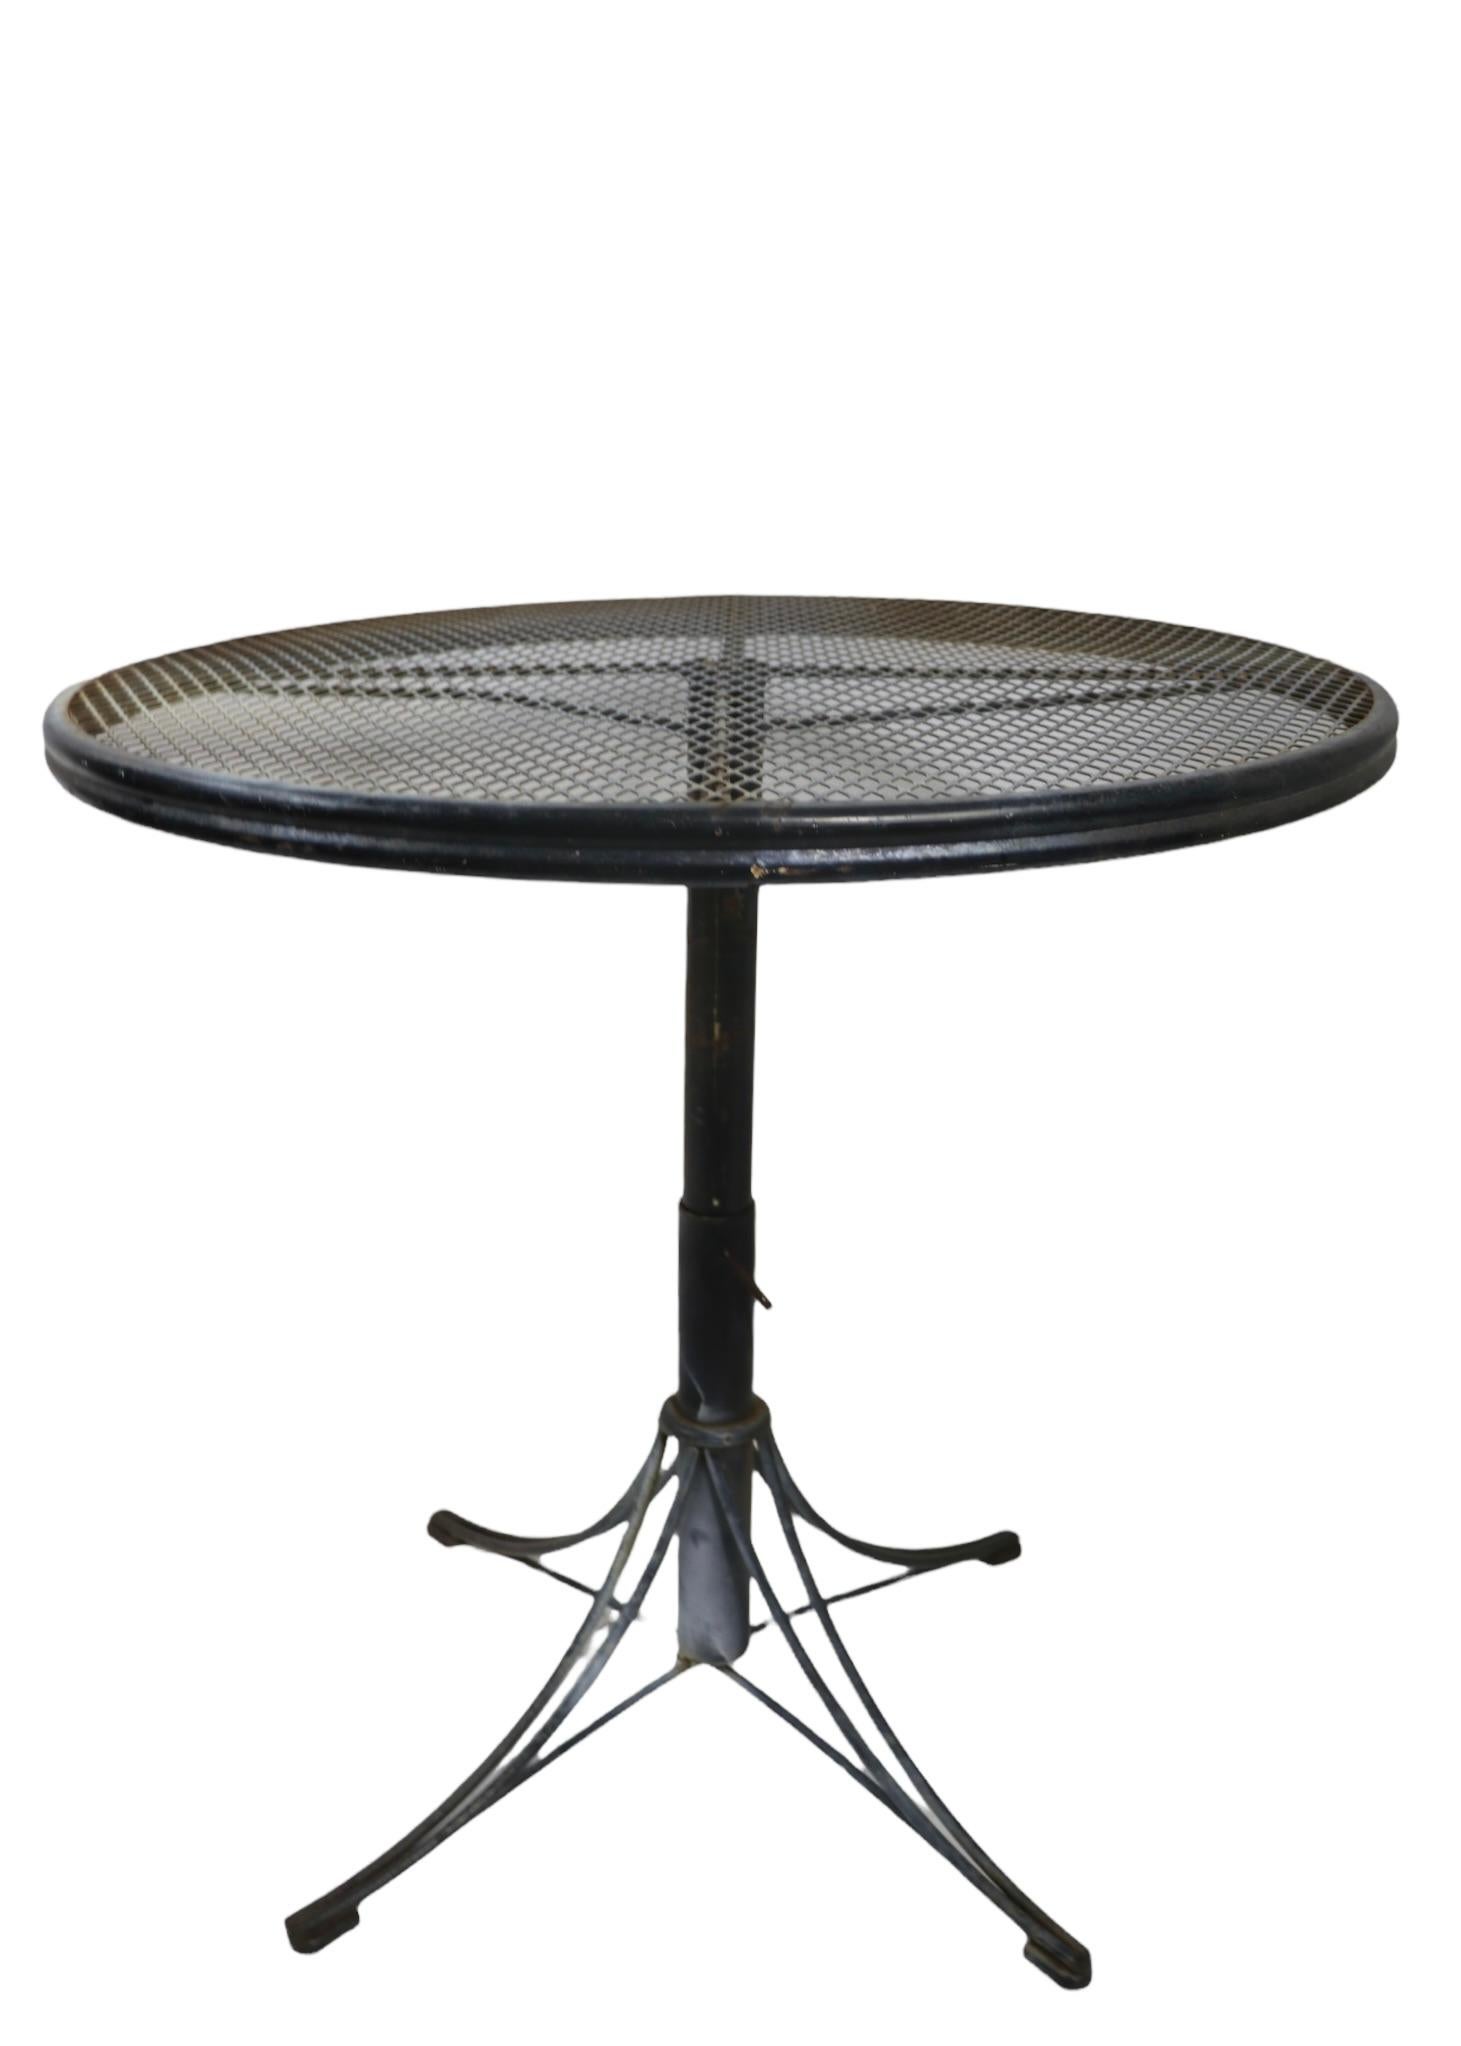 Adjustable Garden Patio Poolside Cafe Dining  Coffee Cocktail Table Homecrest In Good Condition For Sale In New York, NY